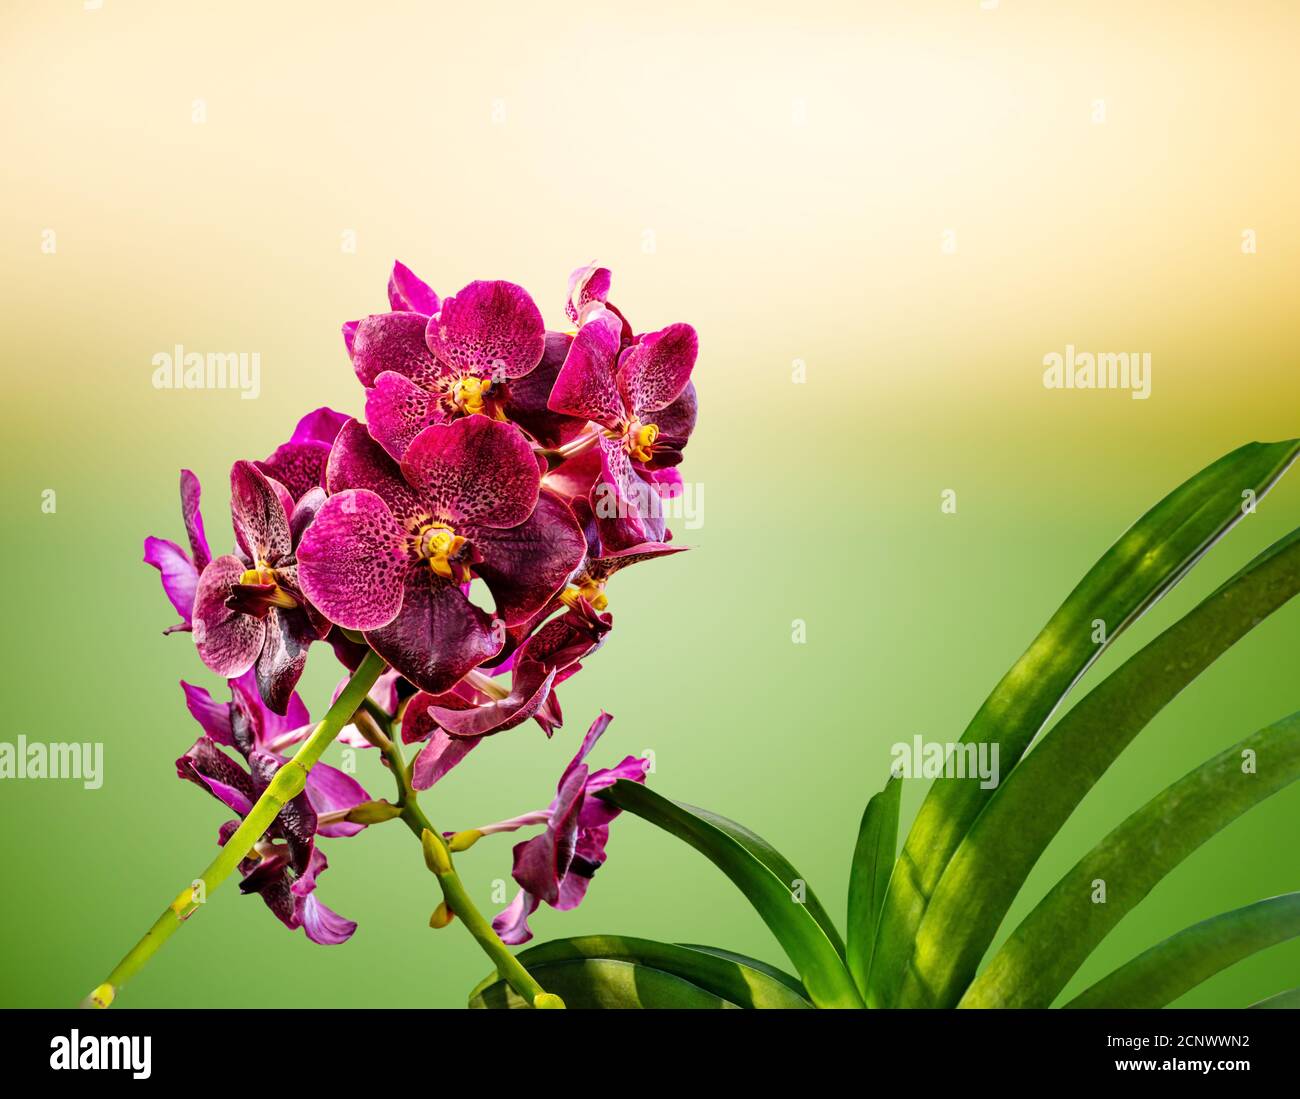 Orchid, Vanda sanderiana, considered as the Queen of Philippine orchid flowers on blurred nature background, Macro Stock Photo